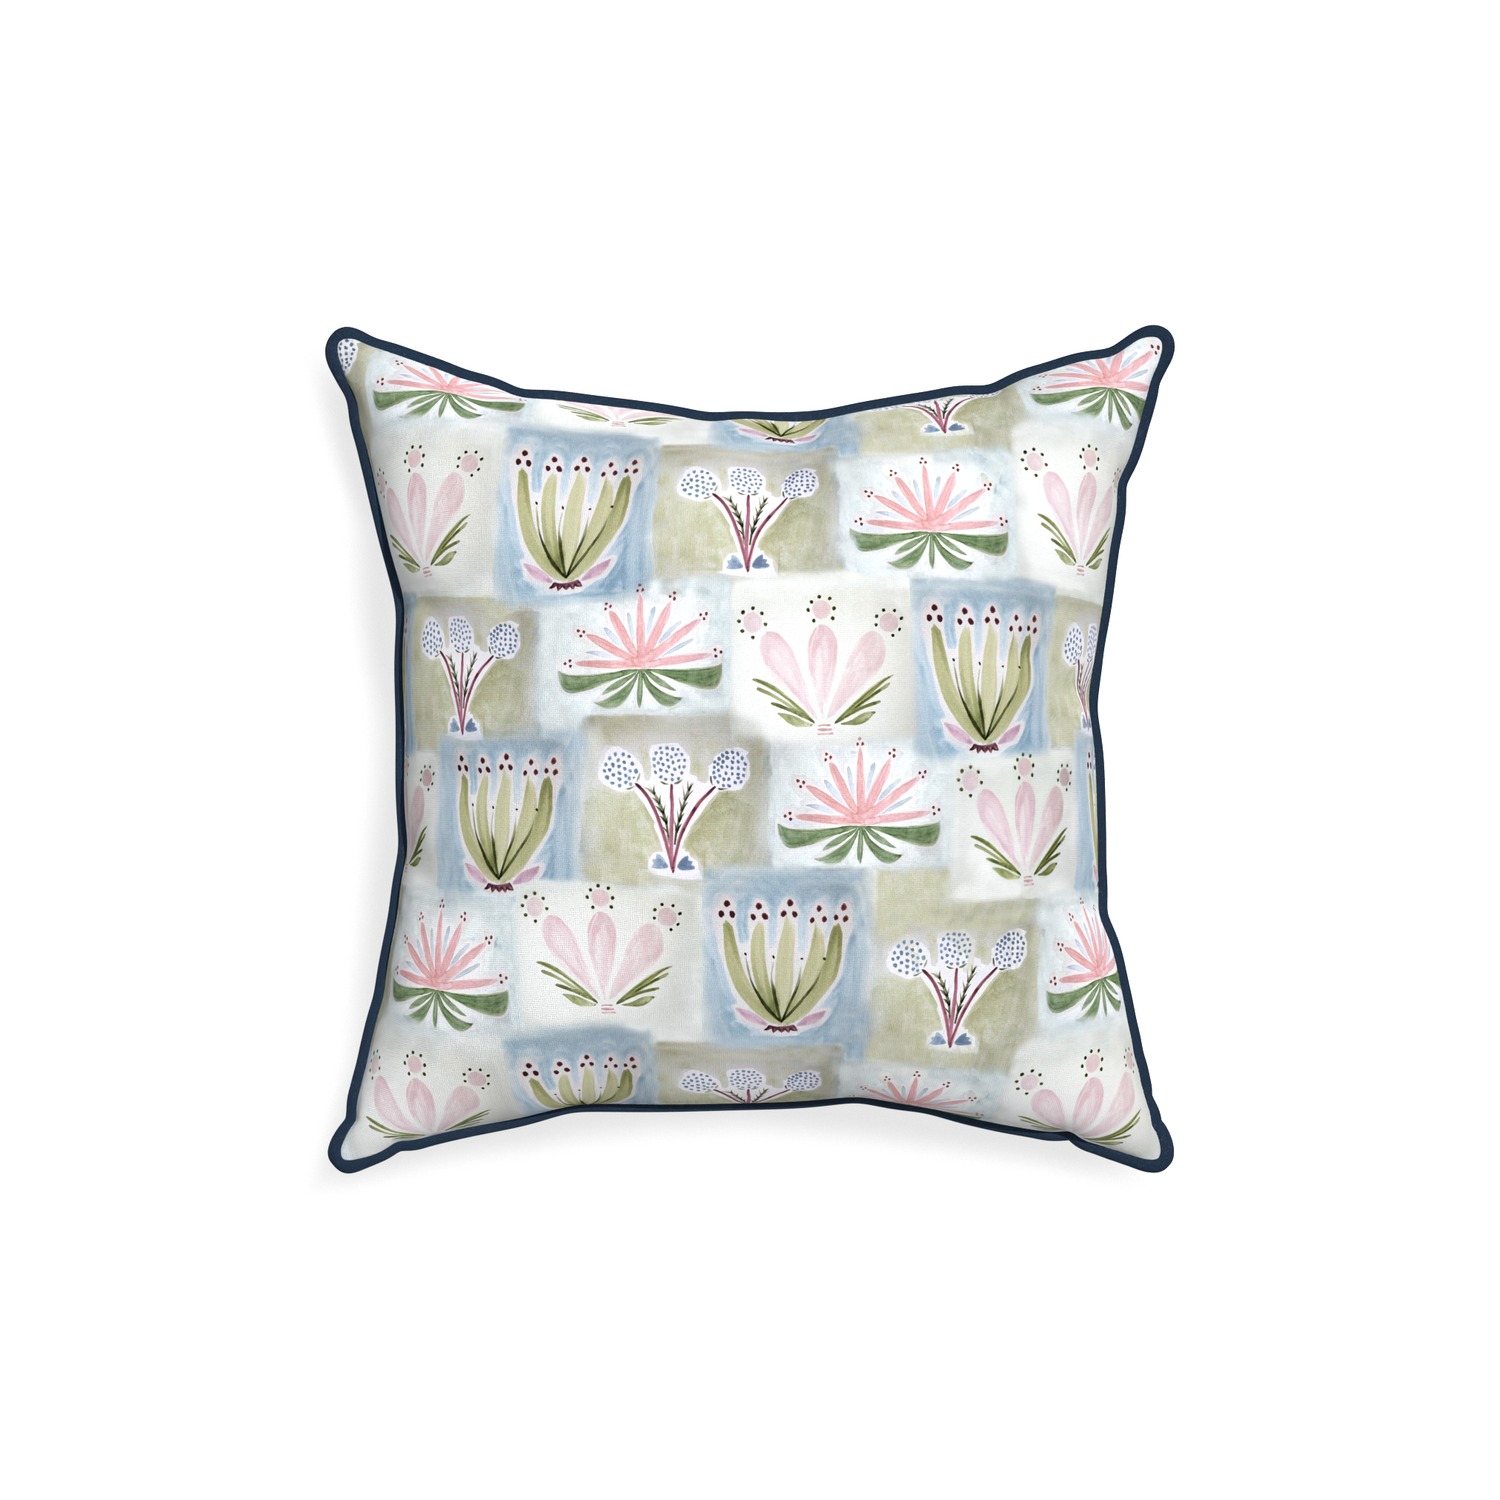 18-square harper custom hand-painted floralpillow with c piping on white background